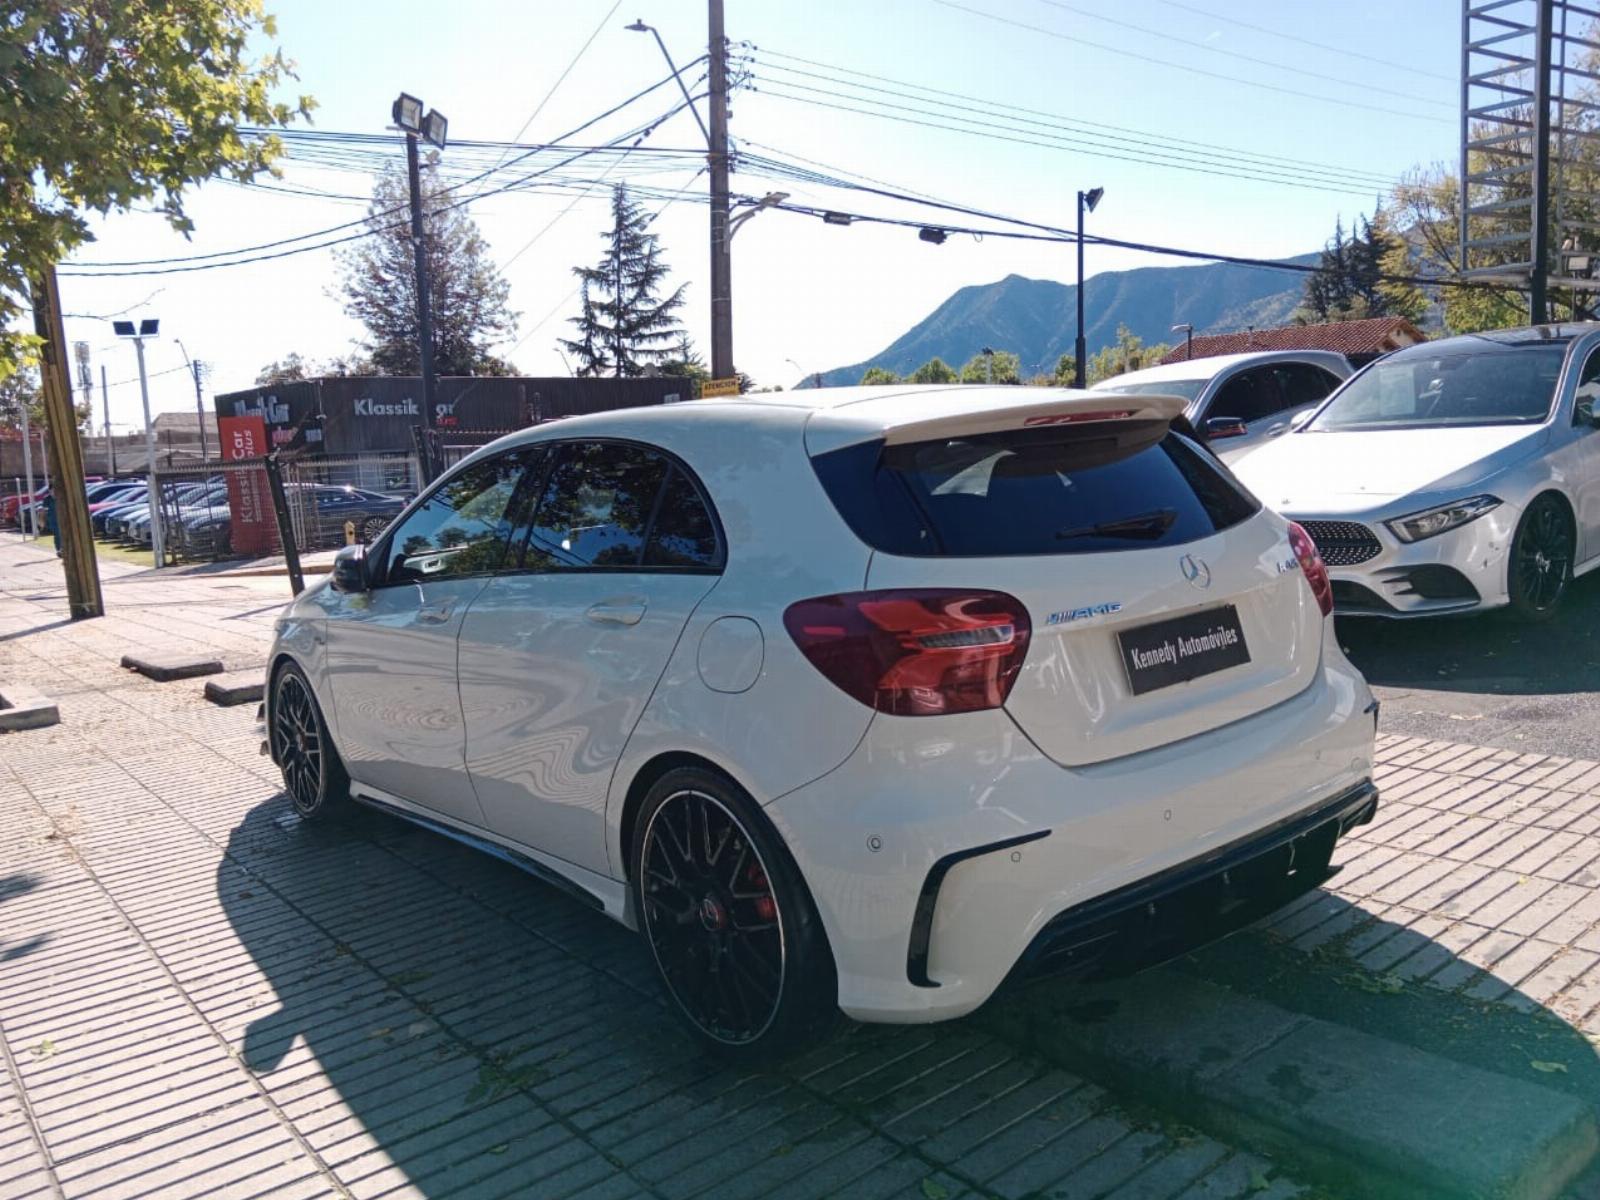 MERCEDES-BENZ A45 2.0 A45 AMG AUTO 4MATIC 2018 Impecable - FULL MOTOR